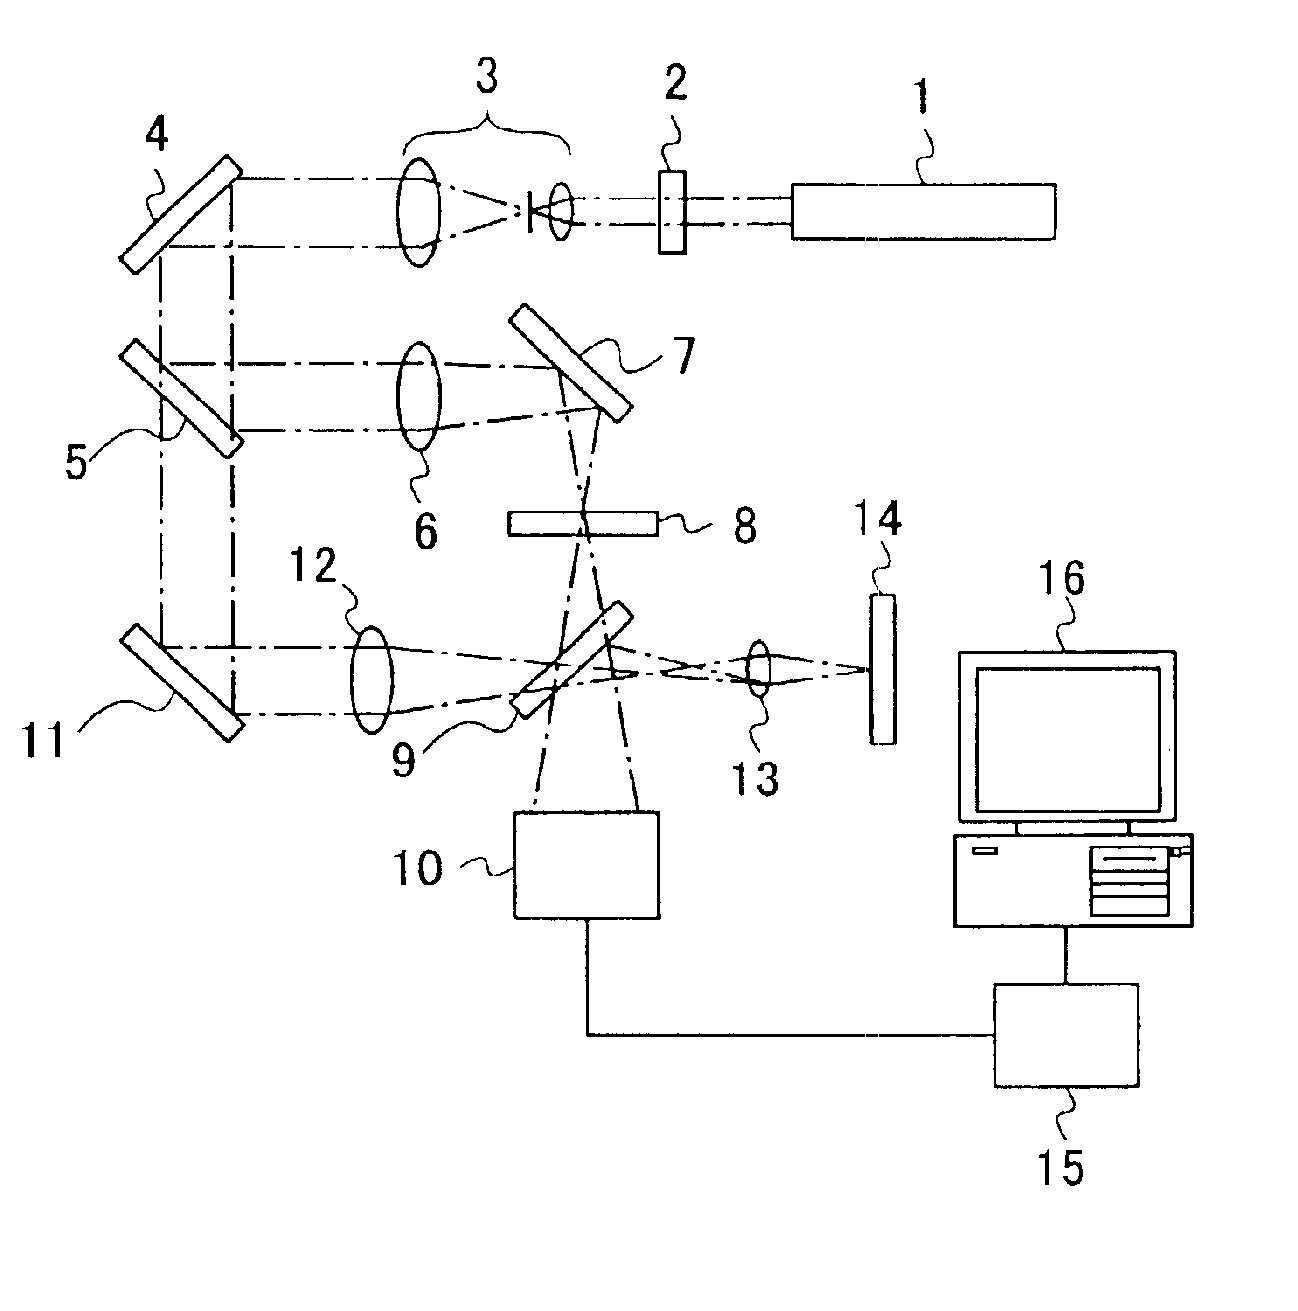 Apparatus for and method of measuring surface shape of an object